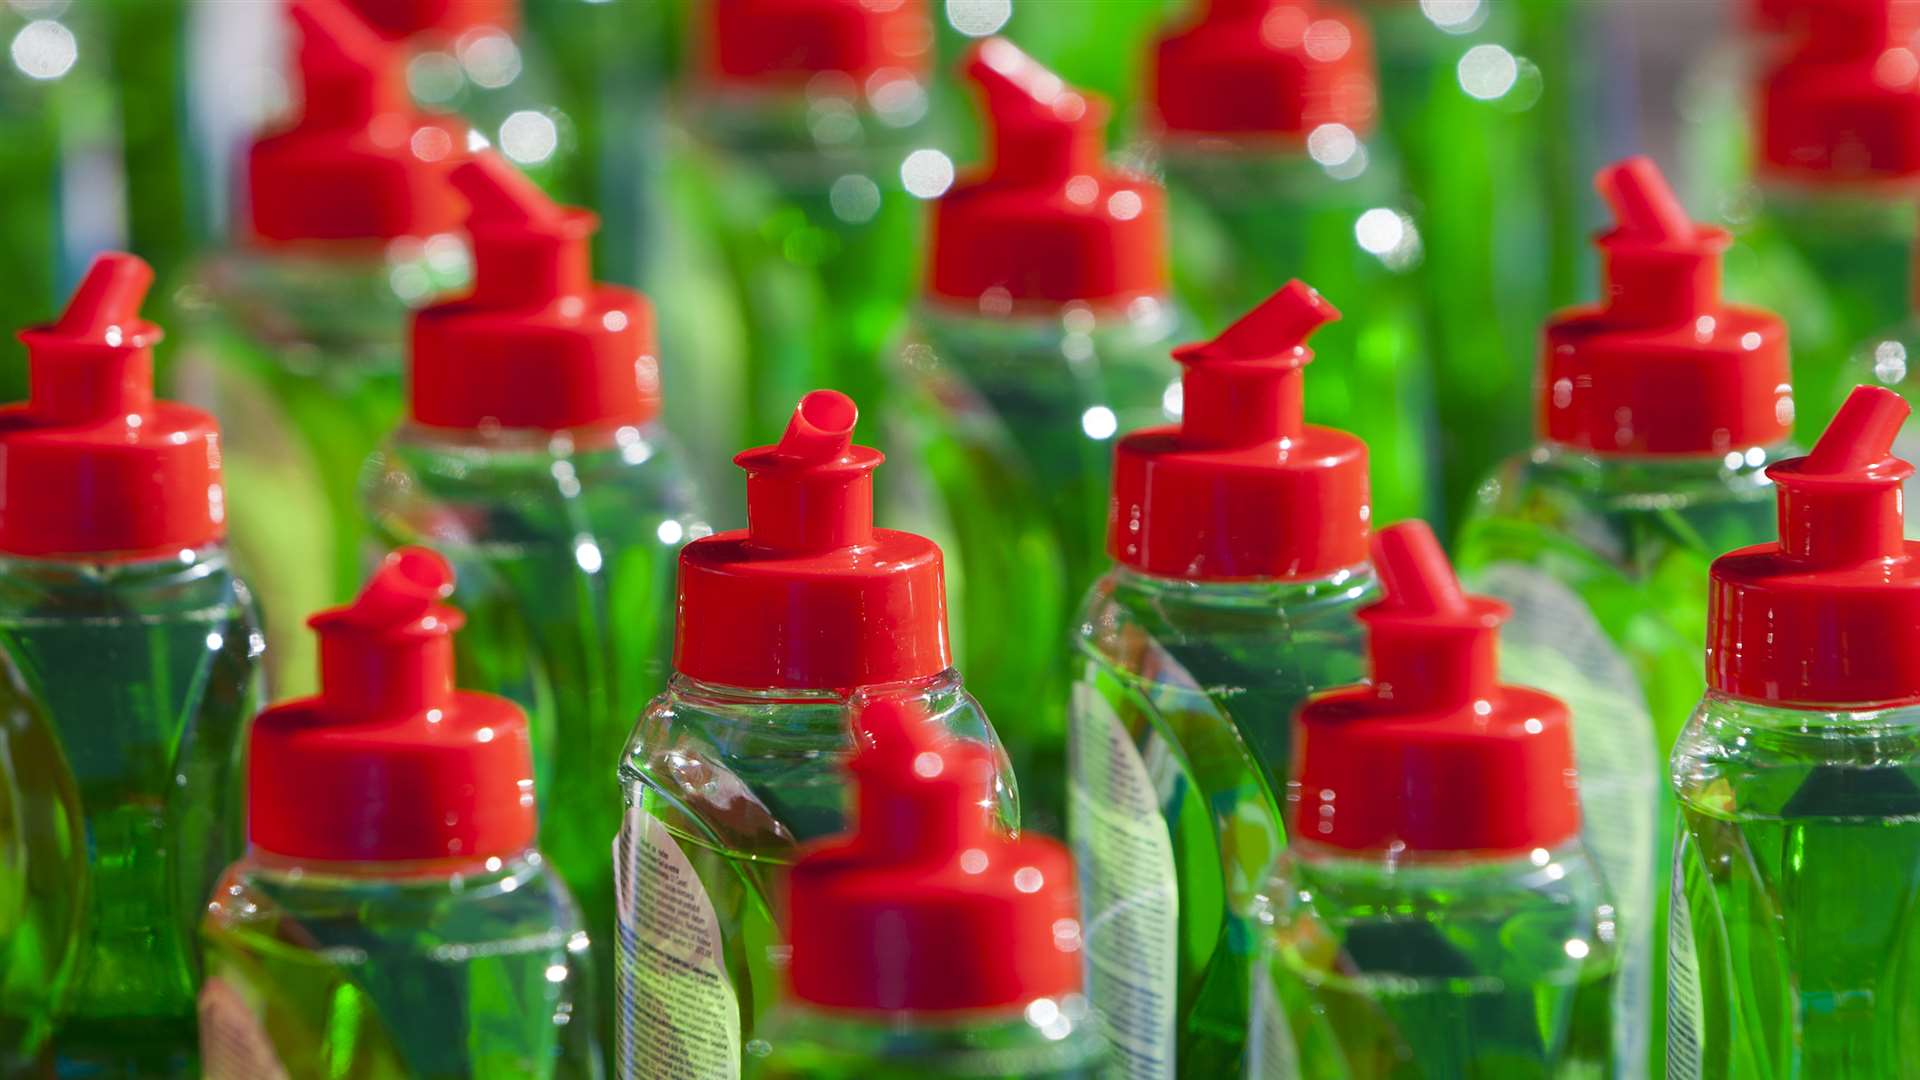 One woman was charged for stealing washing liquid. Picture: GettyImages